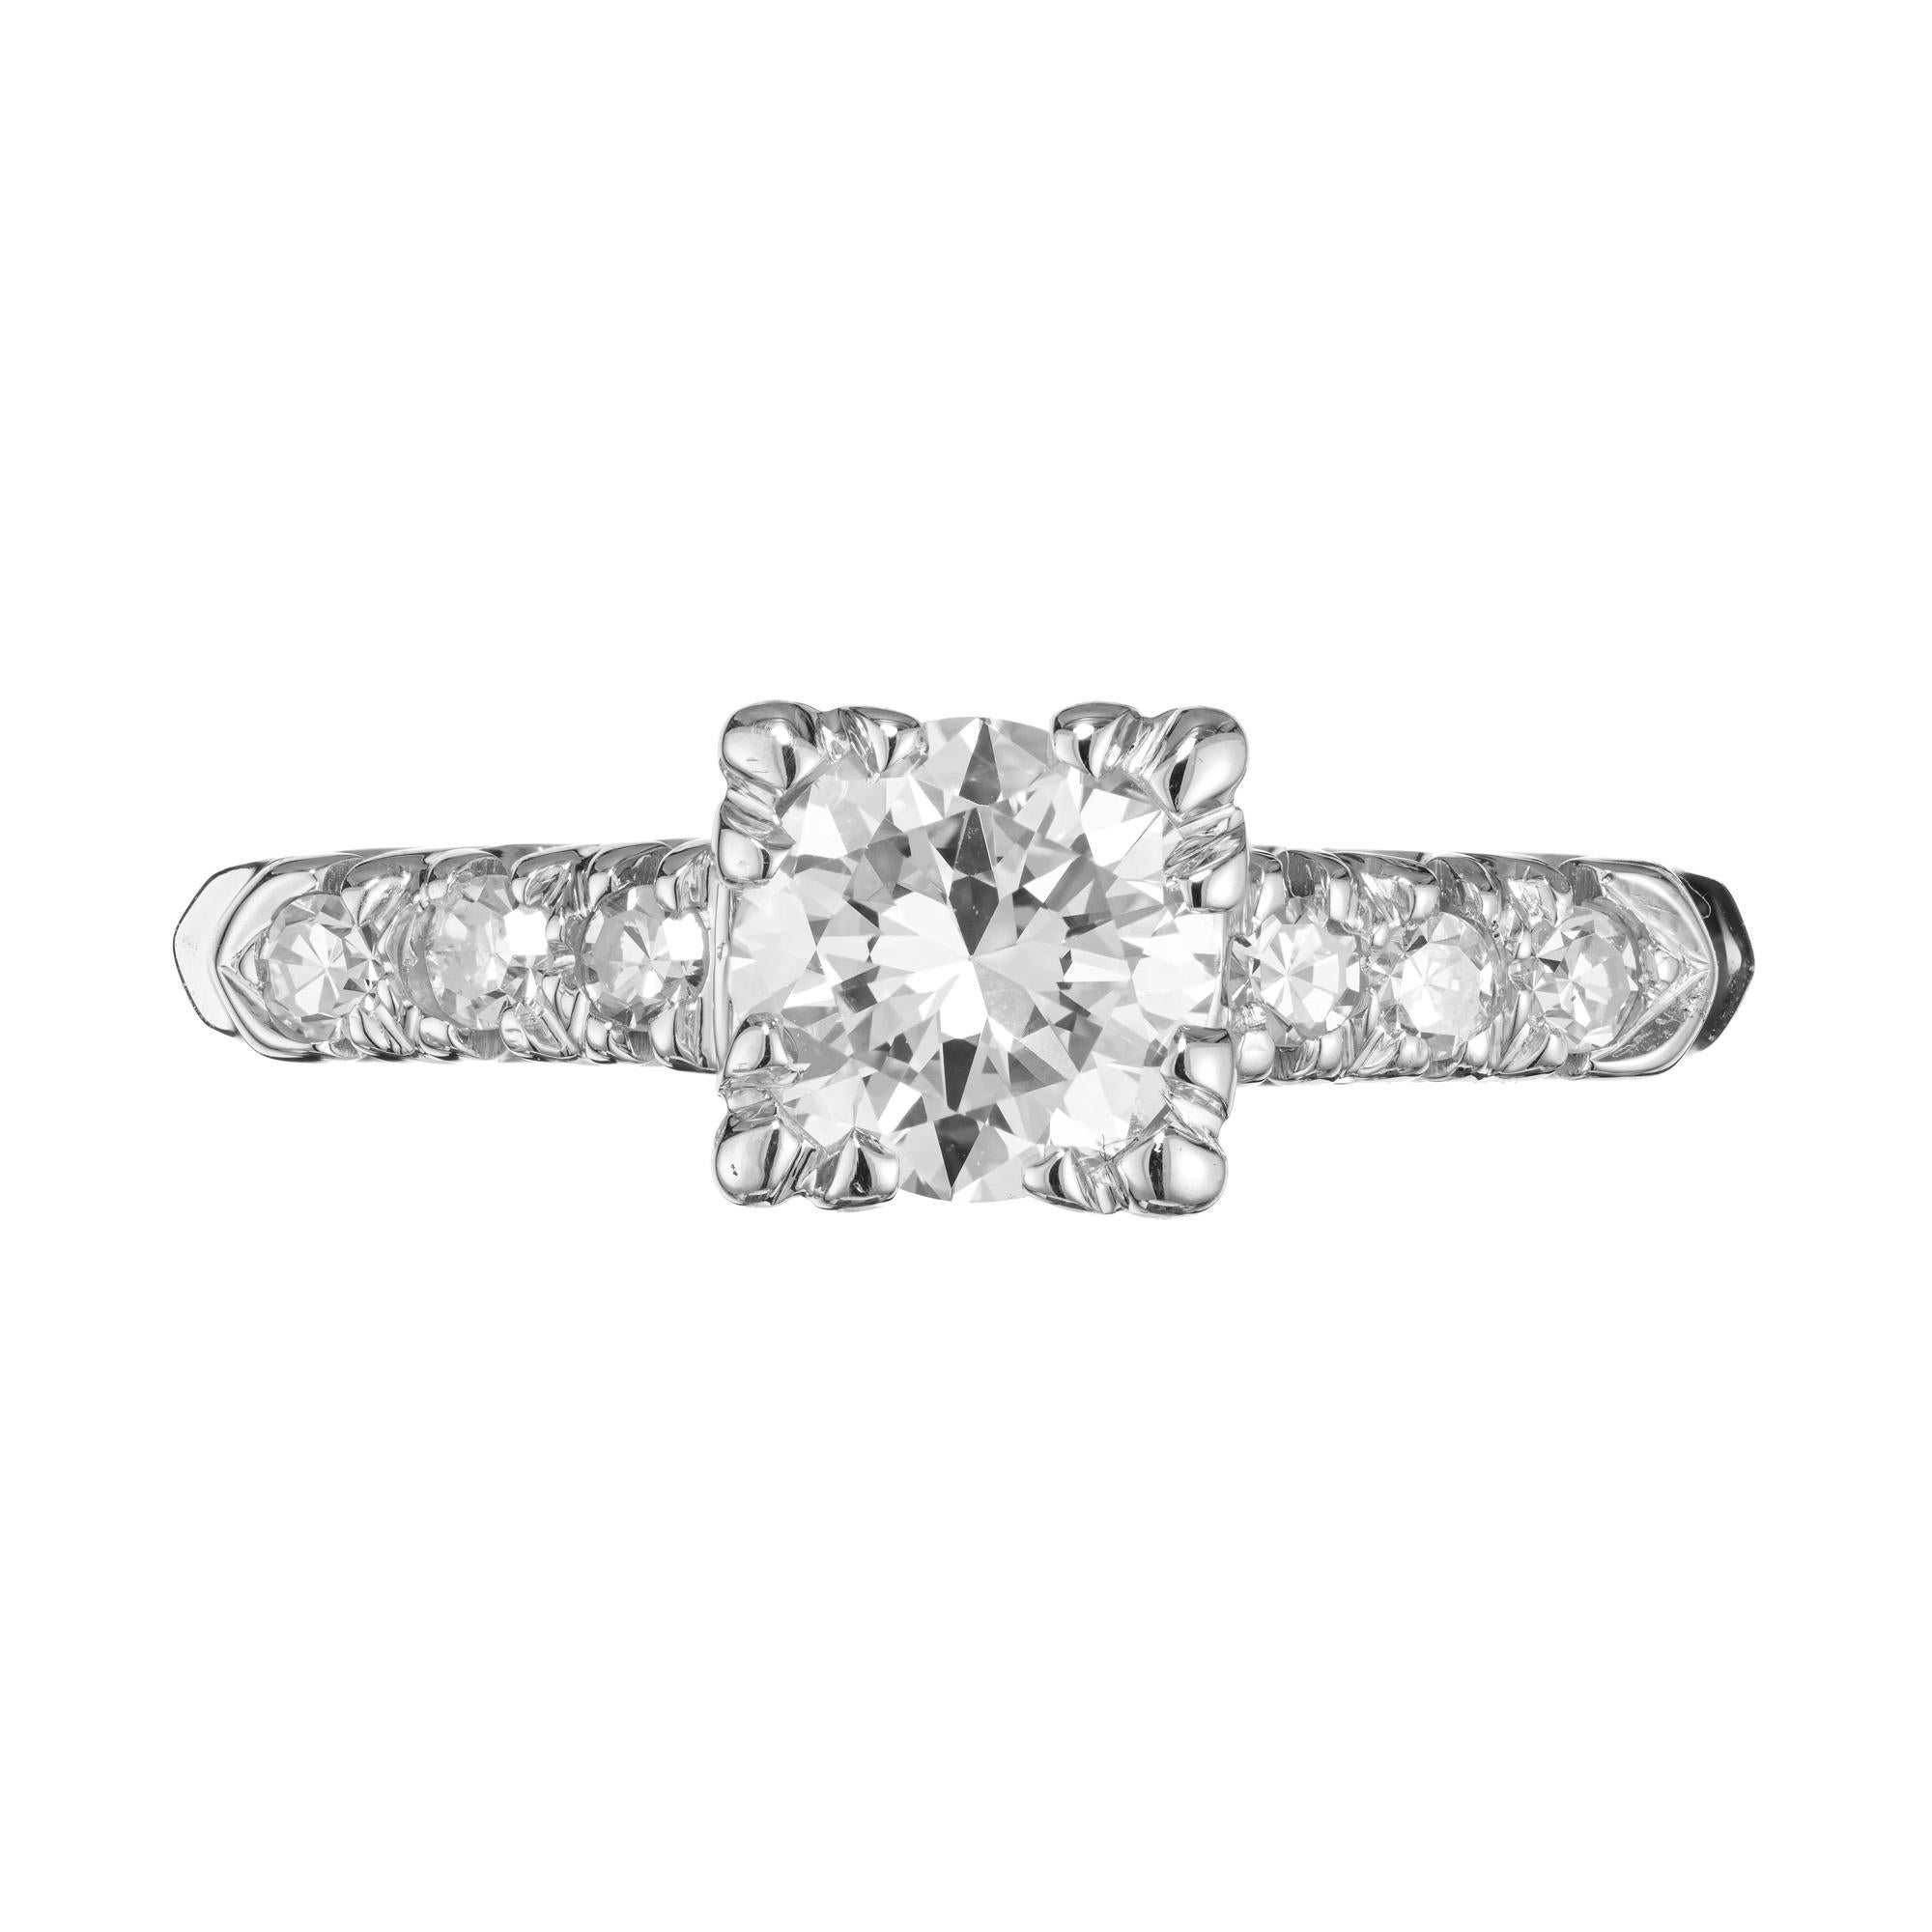 Late Art Deco 1940's diamond engagement ring. EGL certified .65ct round brilliant cut center diamond, set in a 14k white gold fishtail design setting. Both shoulders are set with 3 singe cut diamonds. EGL certified as F-G, near colorless. 

1 round